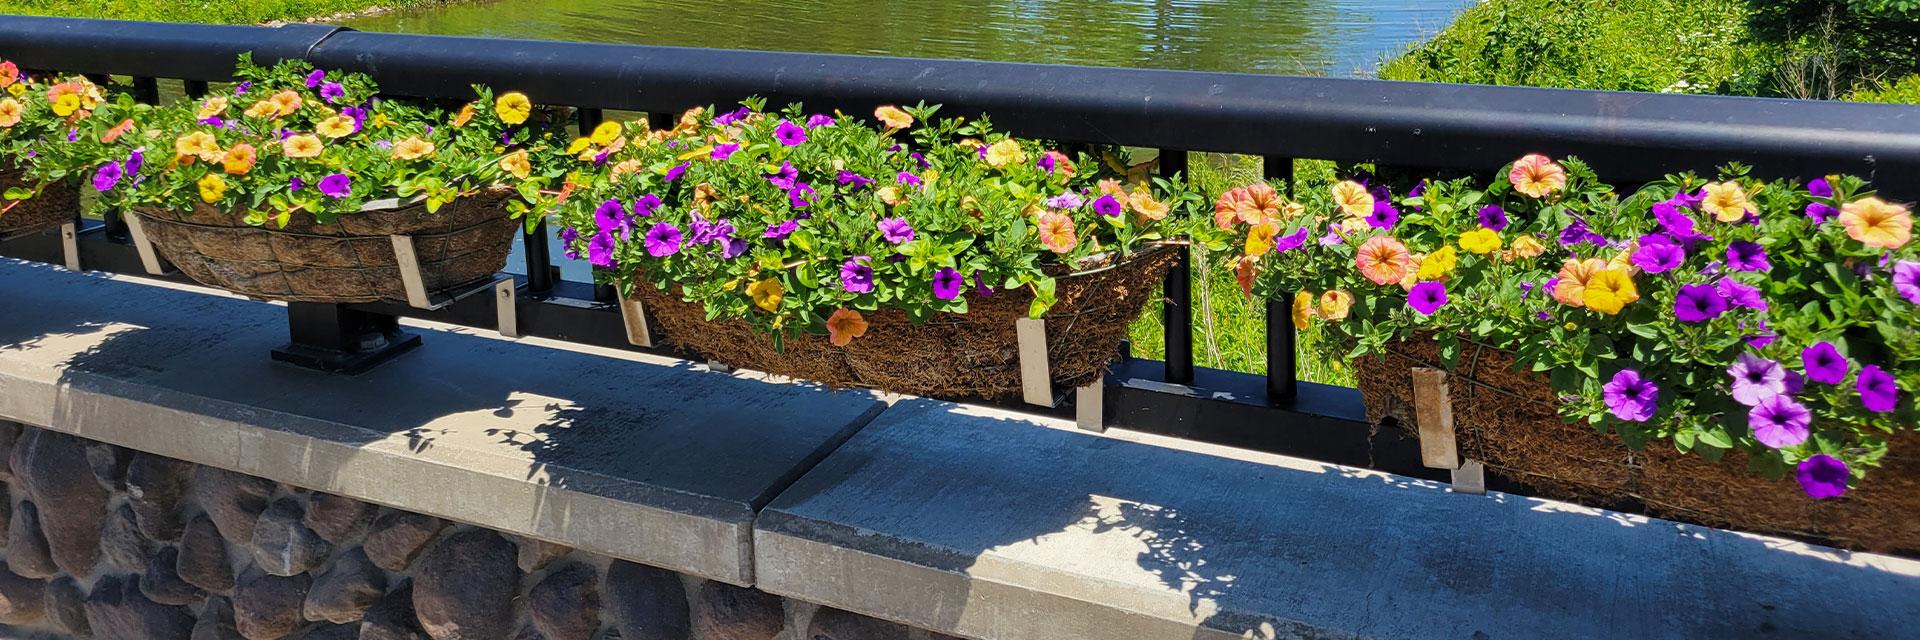 Flowers in planters along railing